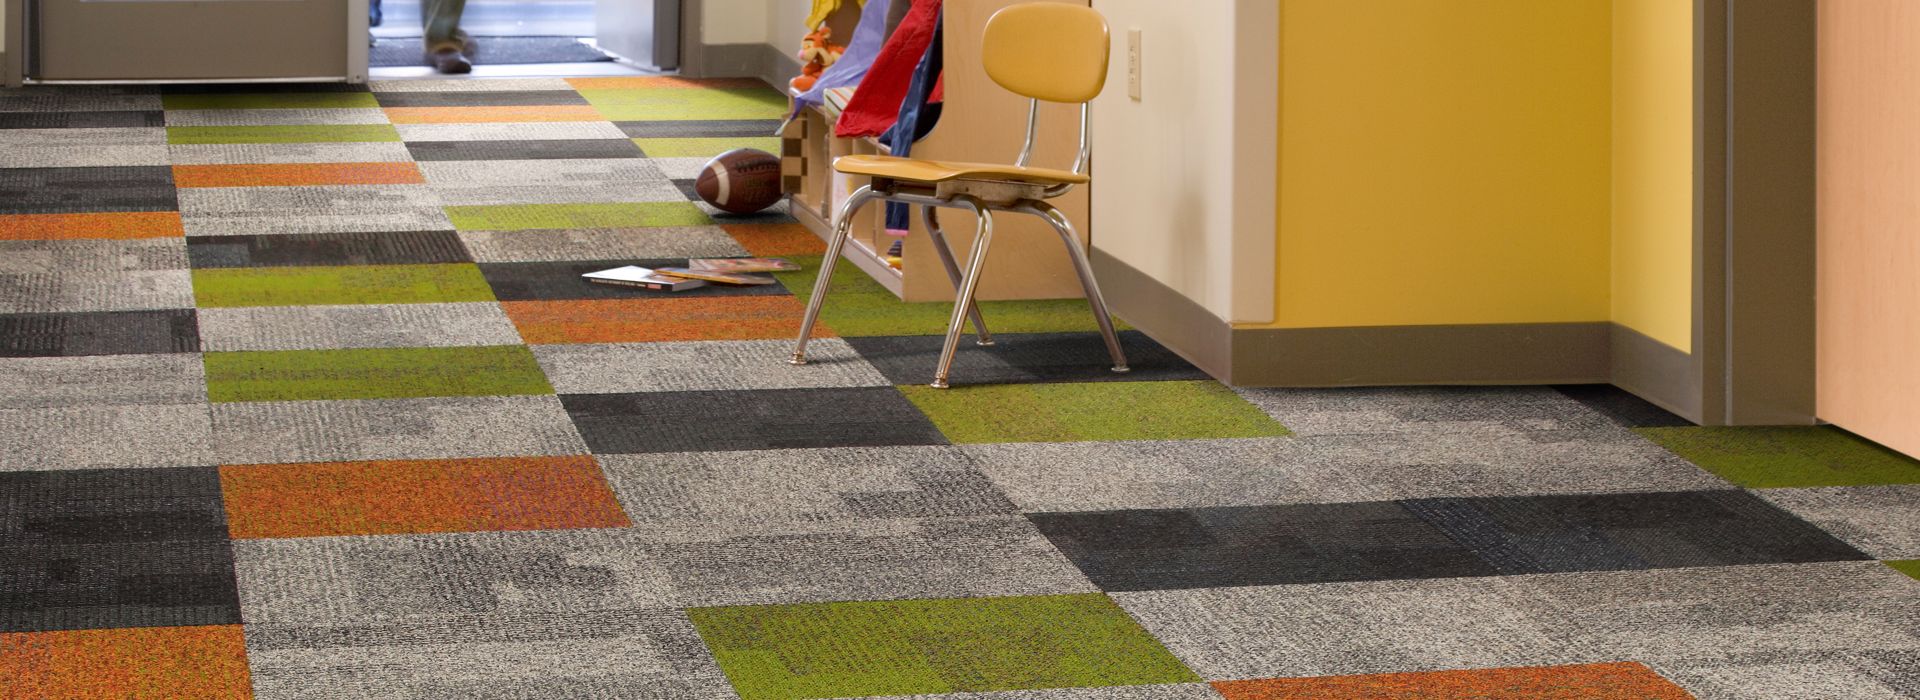 Interface Cubic and Cubic Colours in elementary school entryway with students walking through doors